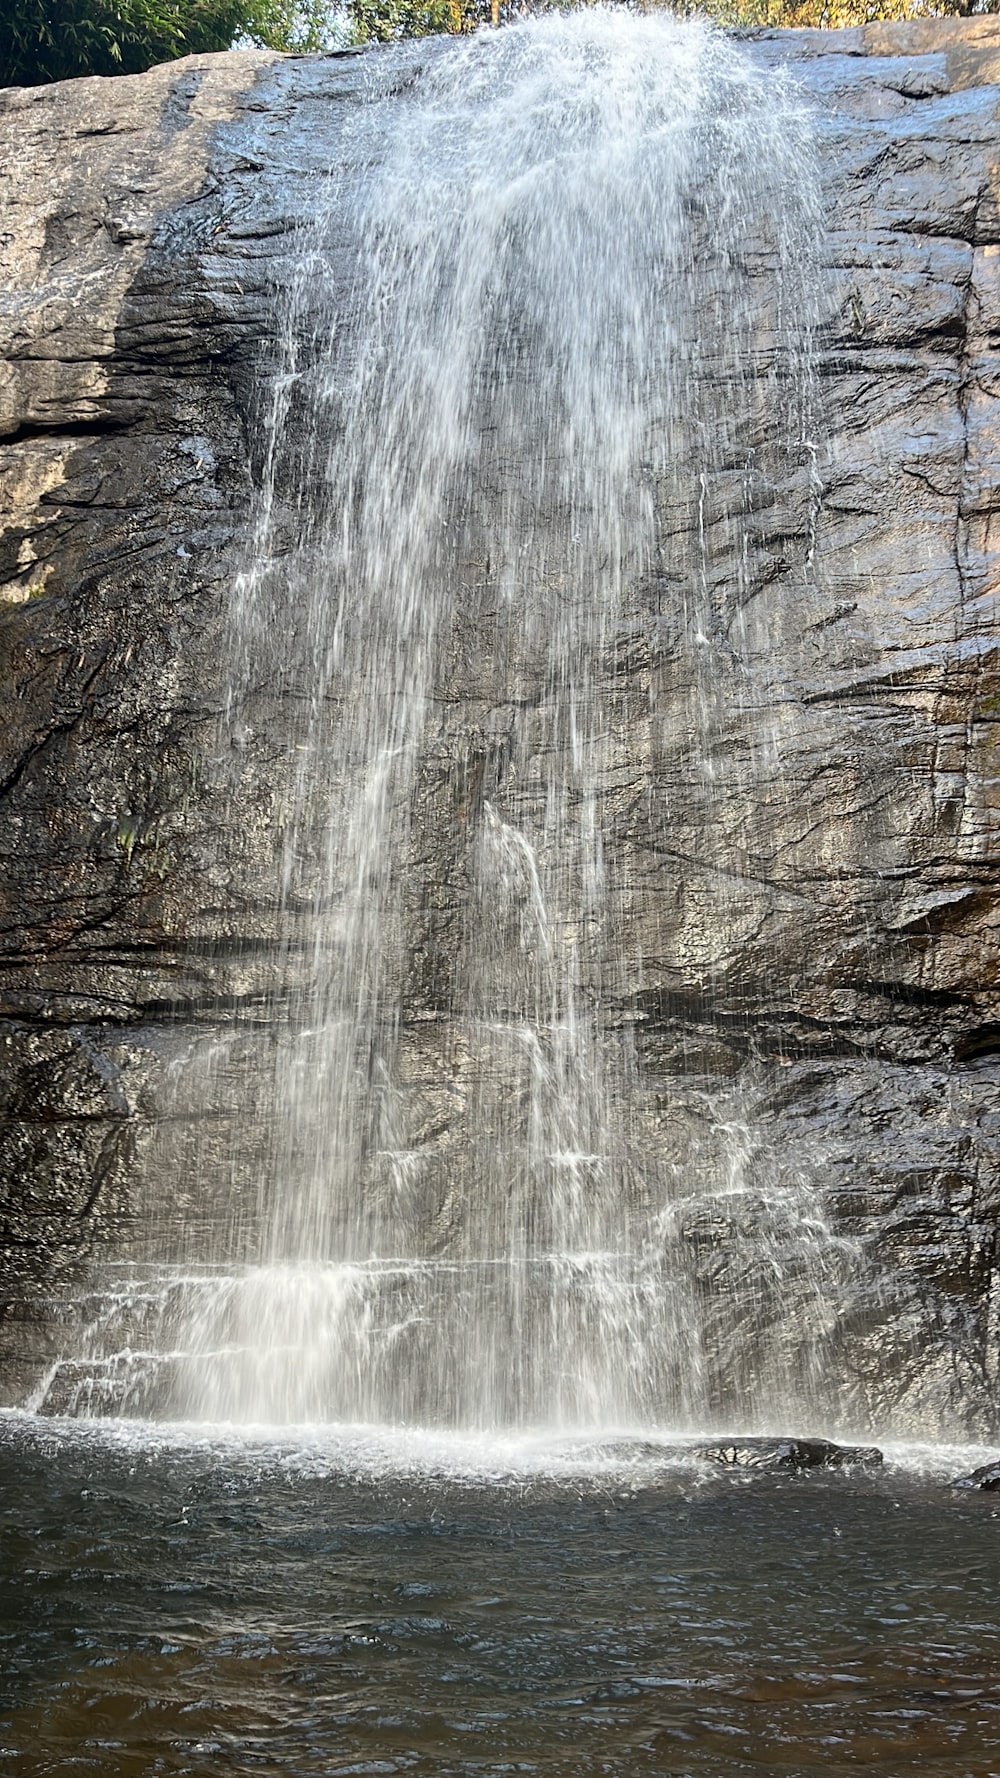 a large waterfall with a man standing under it